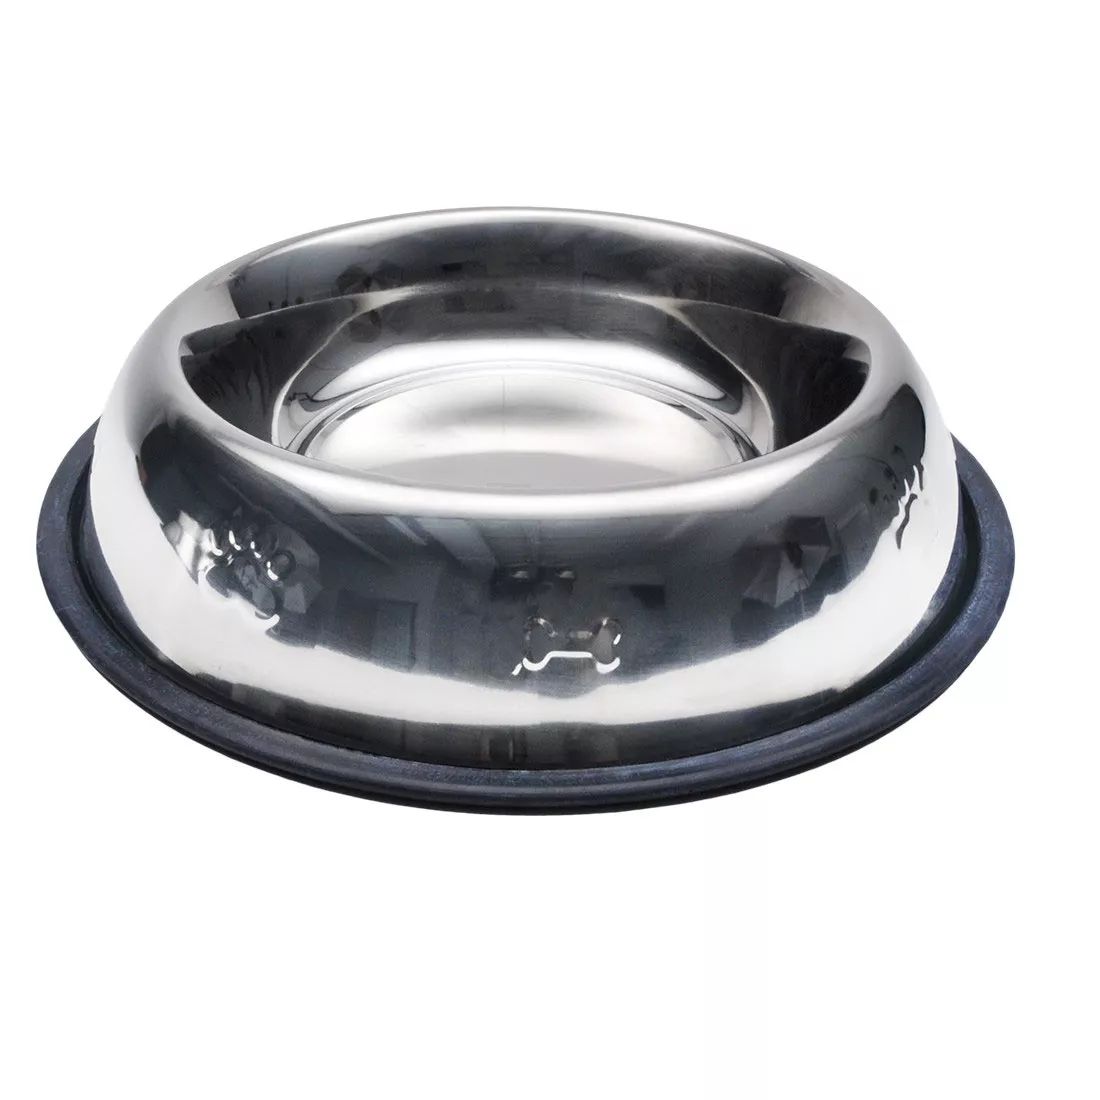 Maslow™ Non-Skid Embossed Stainless Steel Dog Bowl